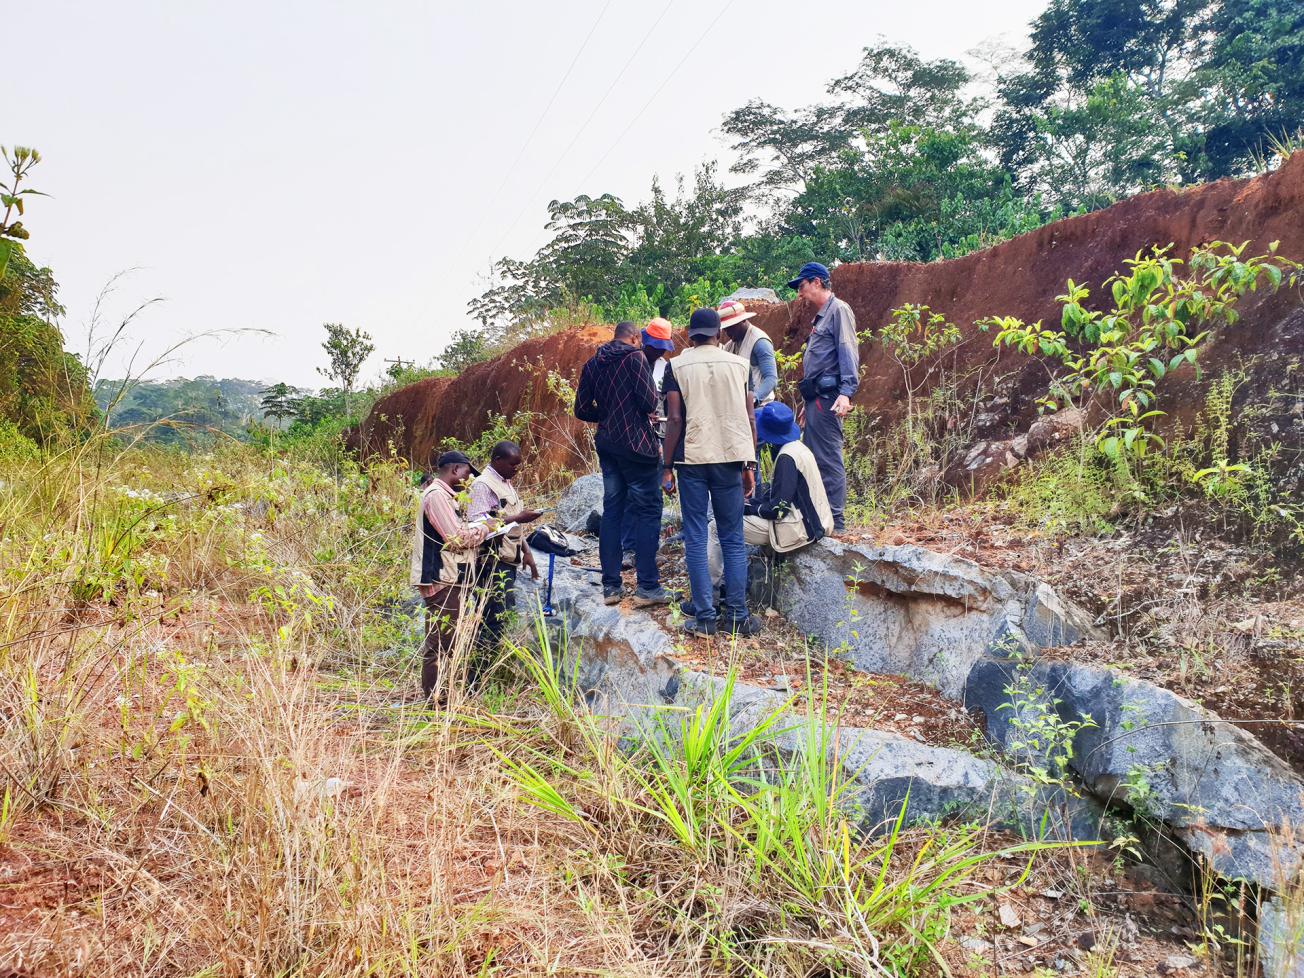 Field survey on a granite inselberg in the Djoum sector in the extreme south of Cameroon.